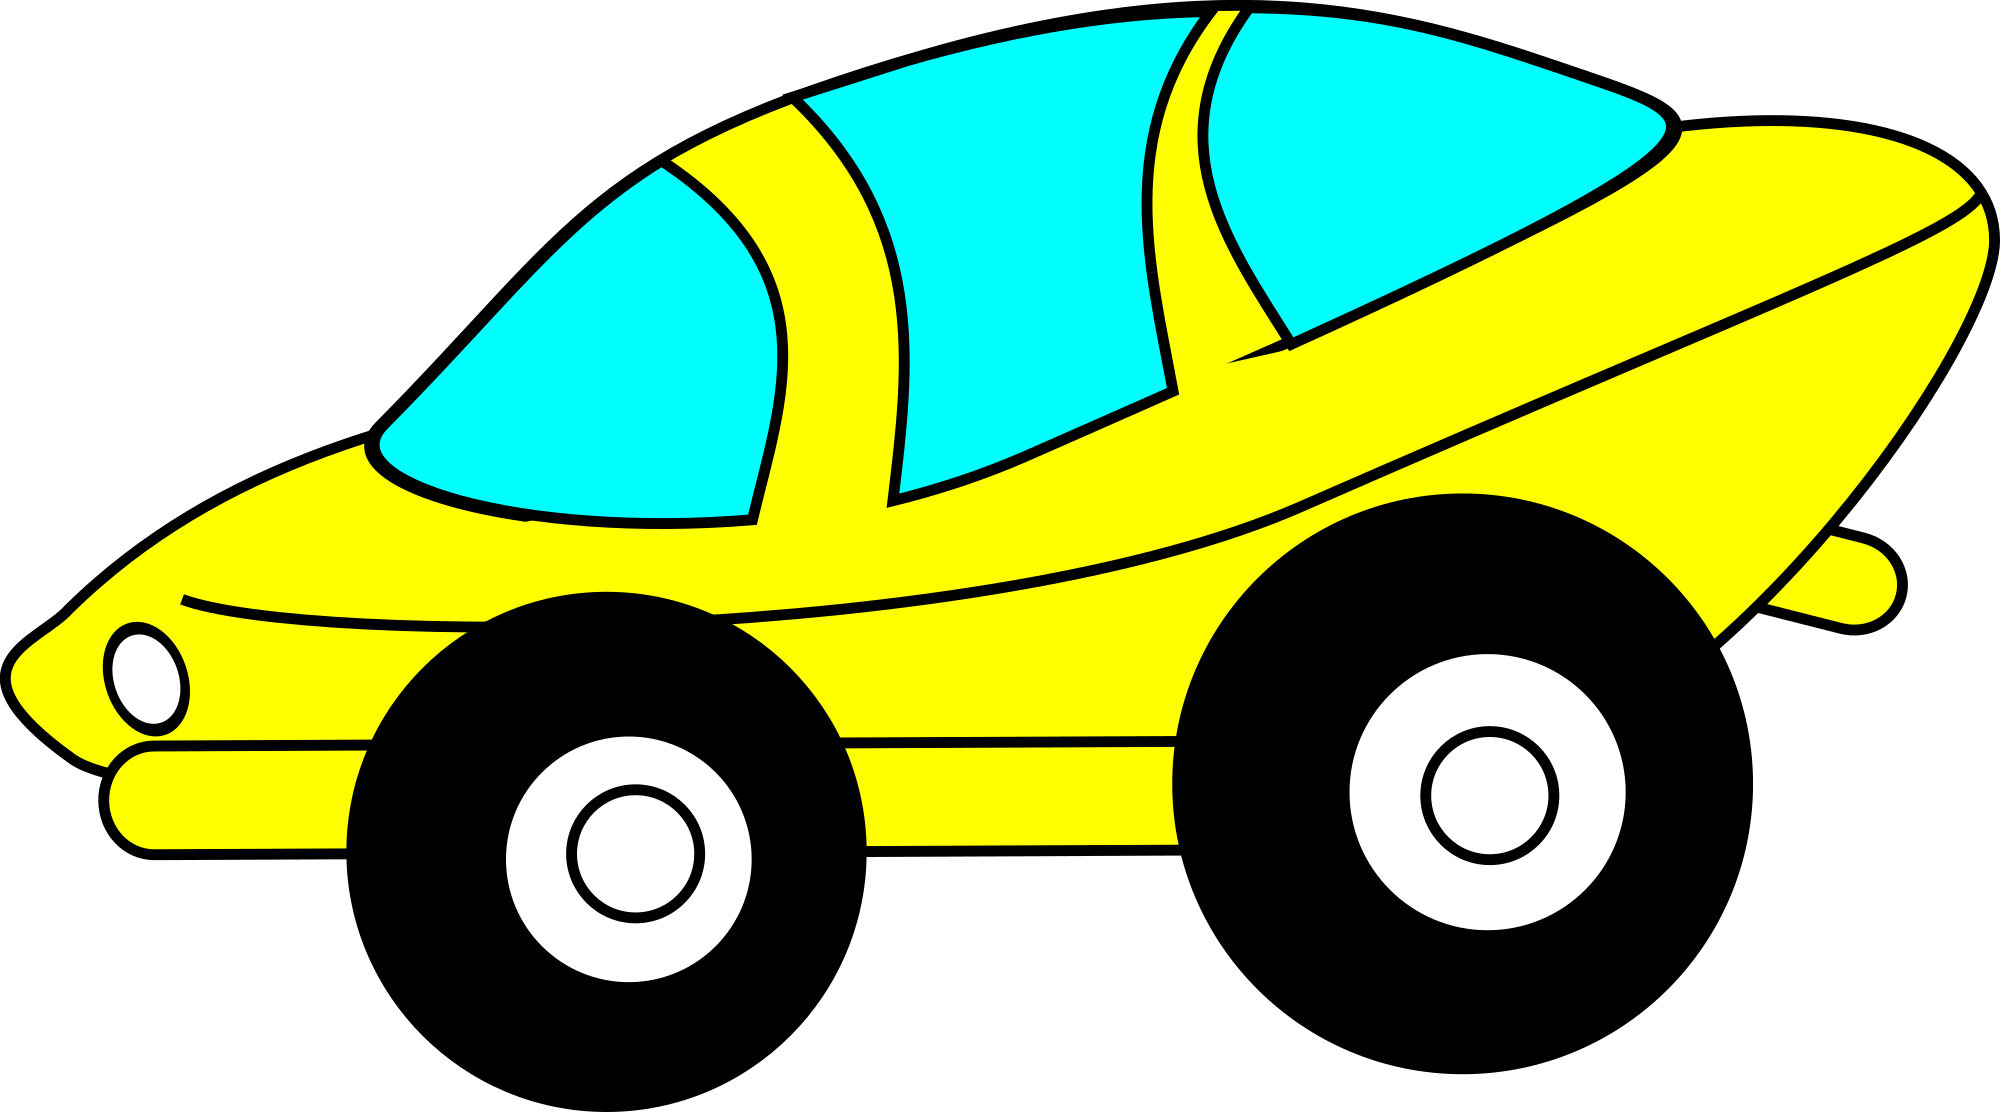 Car black and white clipart high resolution